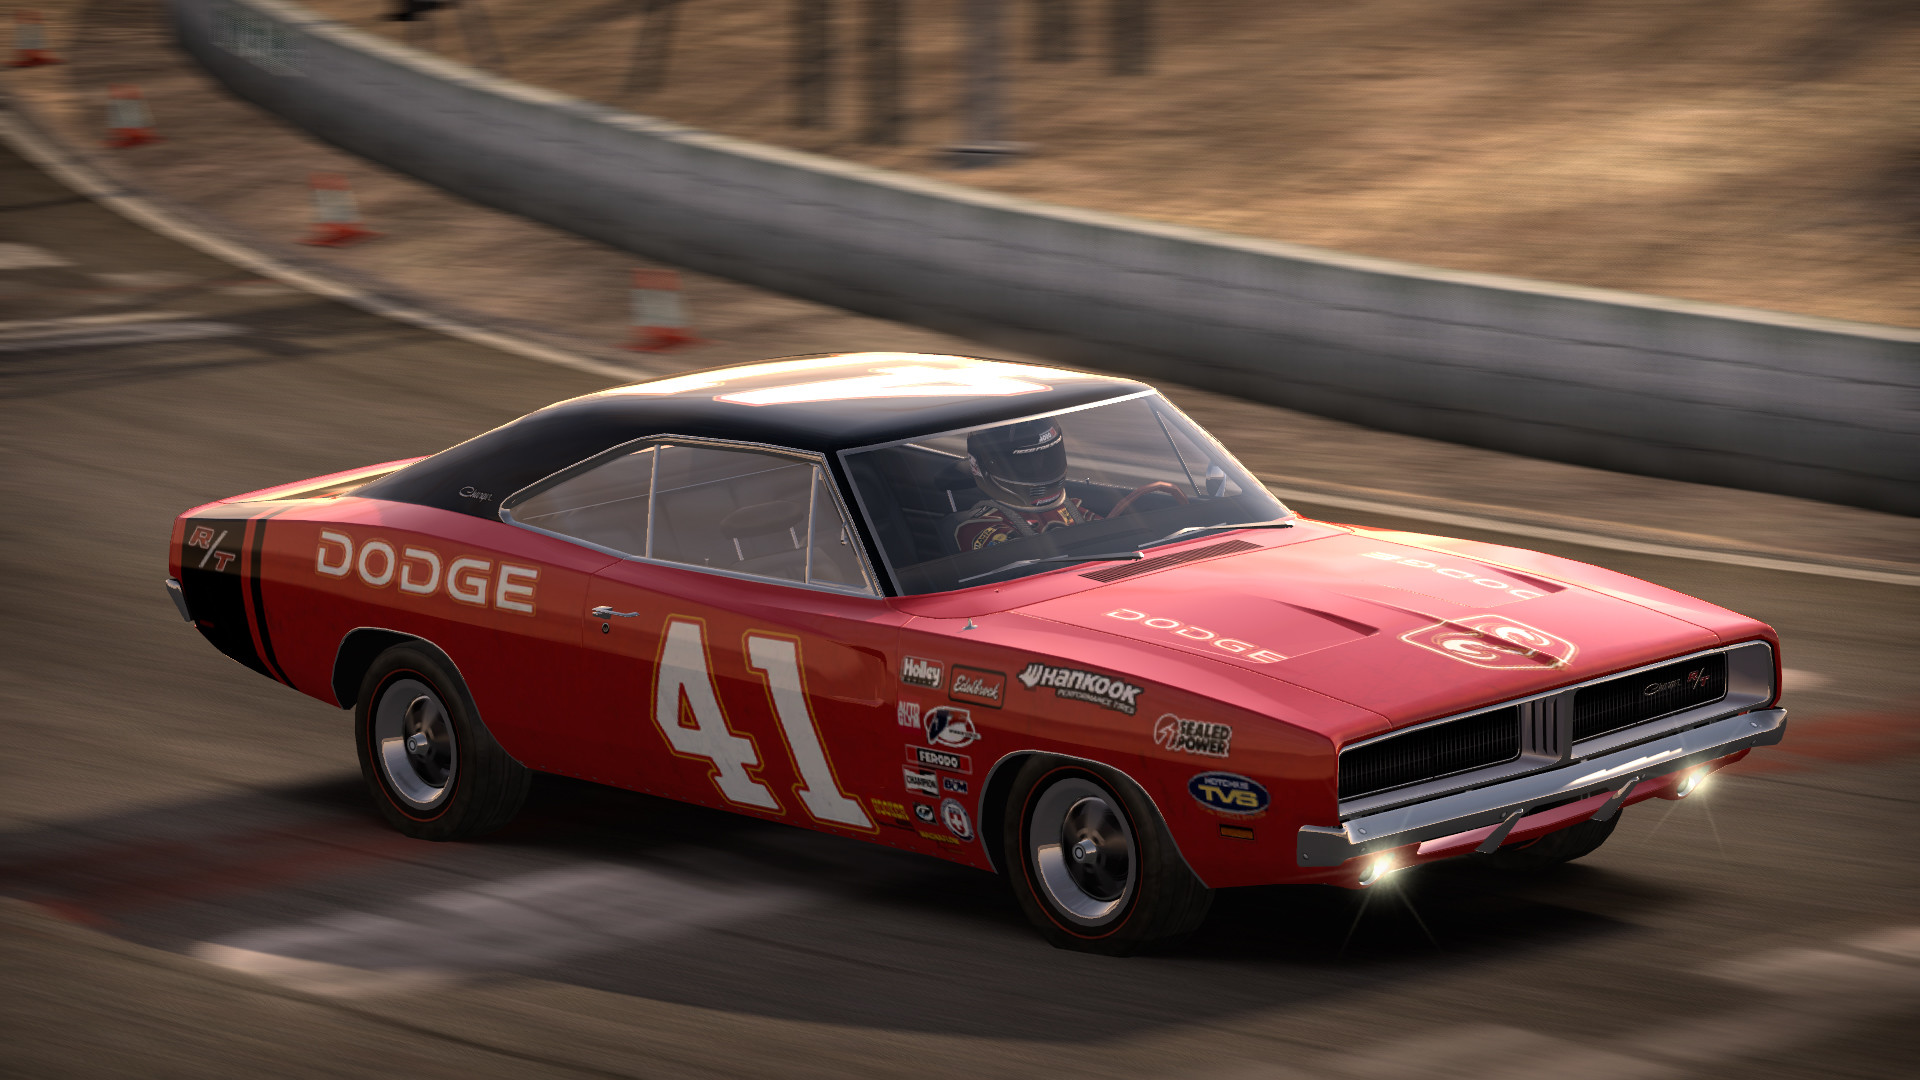 1920x1080 1969 Dodge Charger R/T racing game graphic.